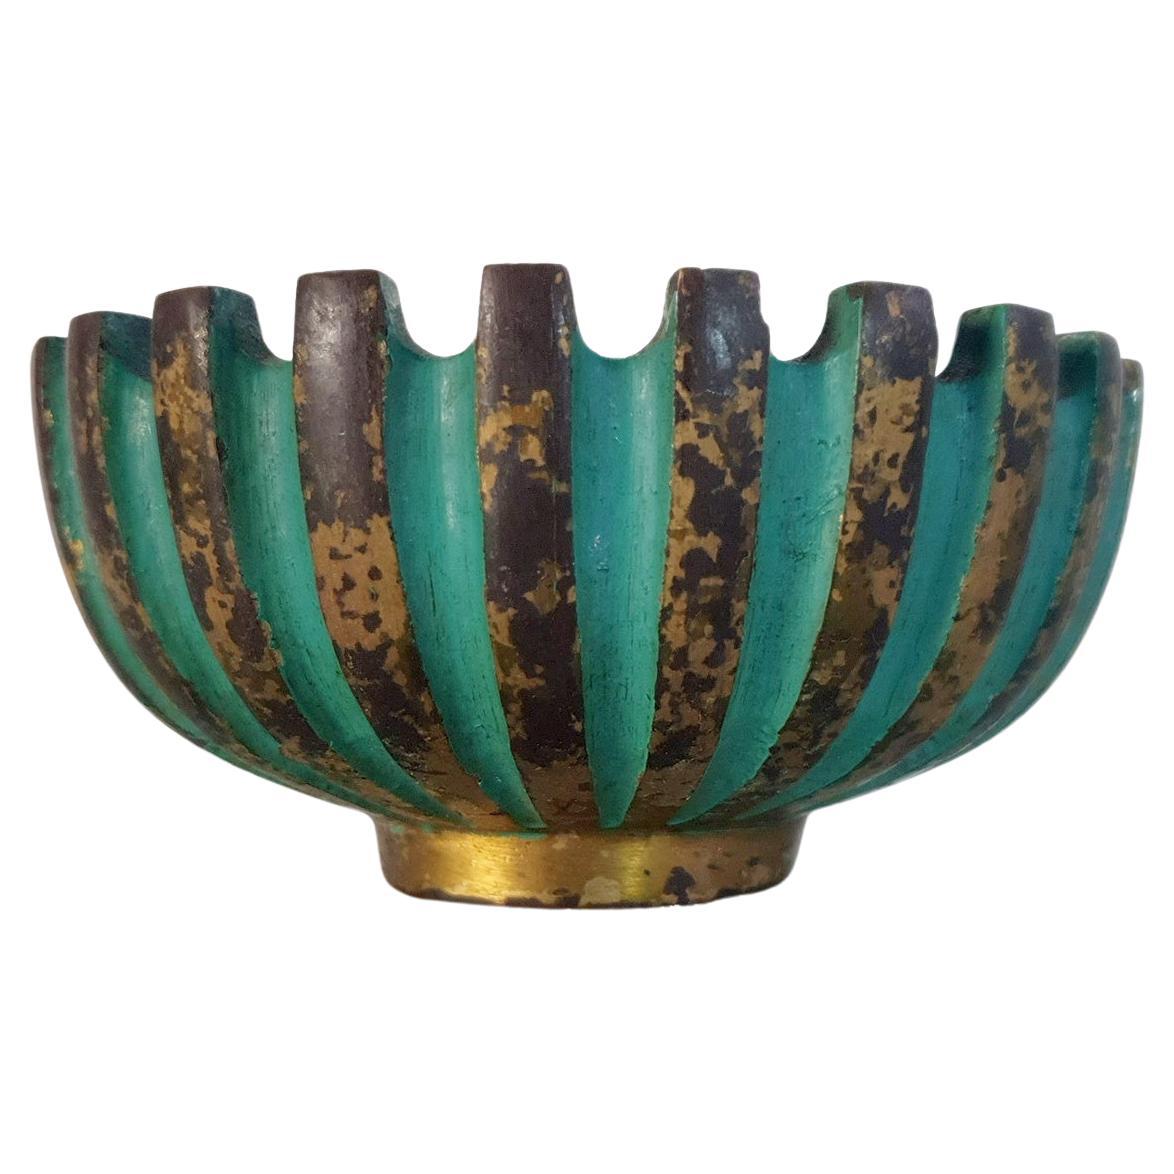 A solid bronze object bowl with verdigris patina and hand hammered inside designed by Hungarian designer Maurice Ascalon and produced by Pal-Bell, Tel Aviv, Israel, 1939-1956. Works well for keys or nick-nacks. Retains the original patina but can be